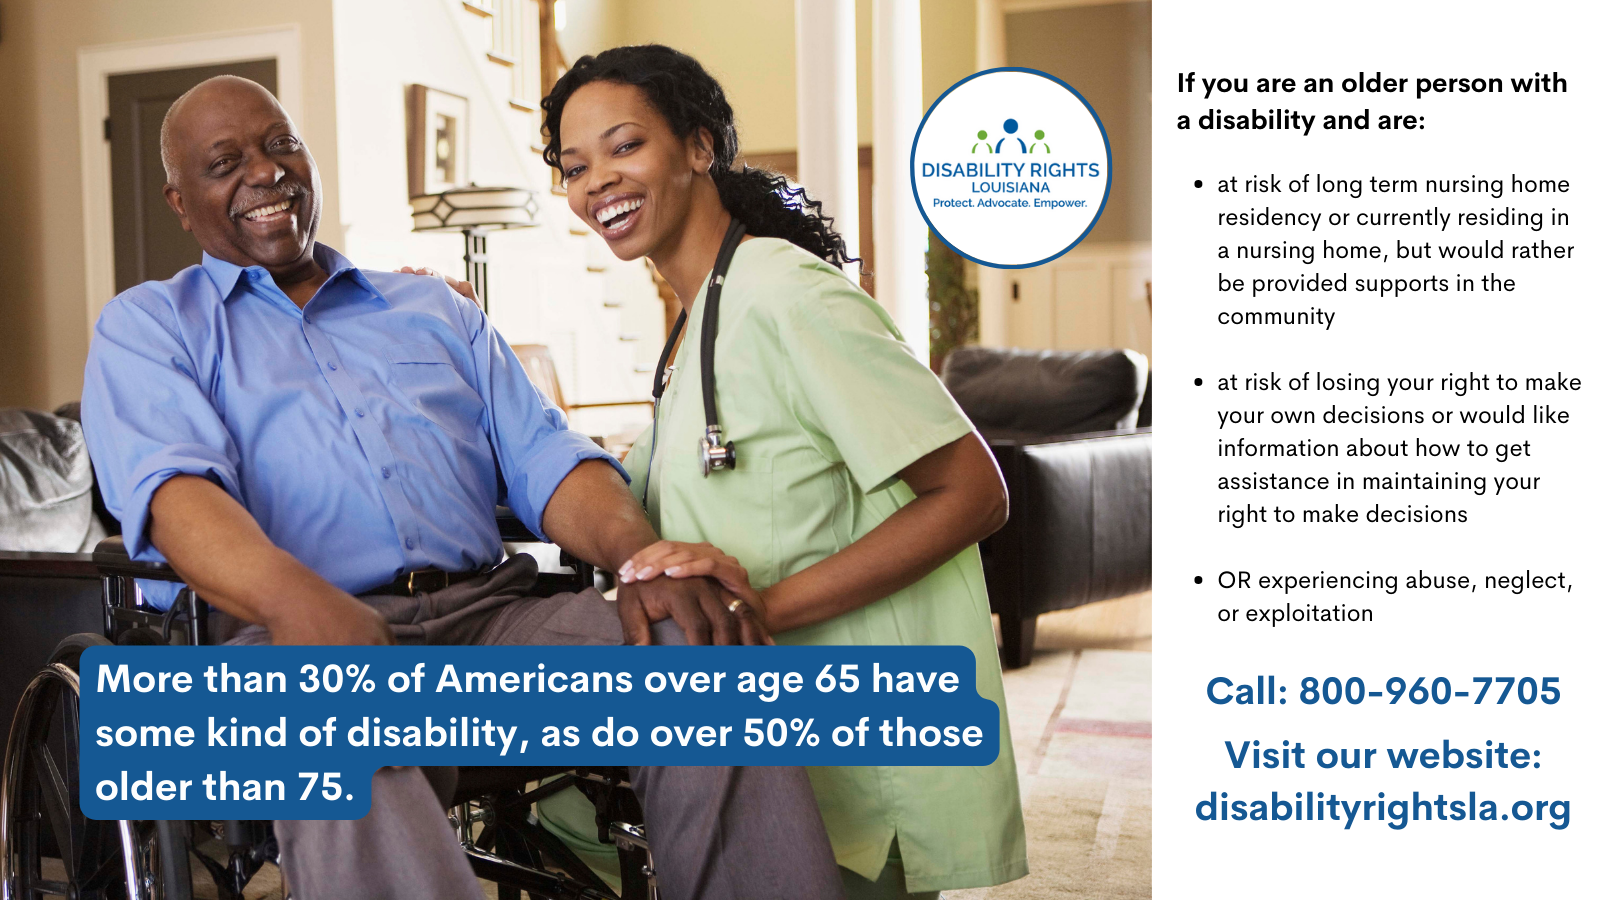 Photo of a young African American nurse in light green scrubs, wearing a stethoscope, embracing the hand of an older African American man to her left, seated in a wheelchair in a healthcare setting. Text reads:May is Older Americans Month. Did you know that more than 30% of Americans over age 65 have some kind of disability, as do over 50% of those older than 75. DRLA works to advance independence, promote home and community based supports and services and combat abuse, neglect and exploitation of older Americans with disabilities. If you are an older person with a disability and are at risk of long term nursing home residency or currently residing in a nursing home, but would rather be provided supports in the community, we may be able to help. If you are an older person with a disability that is at risk of losing your right to make your own decisions or would like information about how to get assistance in maintaining your right to make decisions, we may be able to help. If you are an older person with a disability who is experiencing abuse, neglect, or exploitation, we may be able to help. Call 1-800-960-7705 or visit our website: www.disabilityrightsla.org